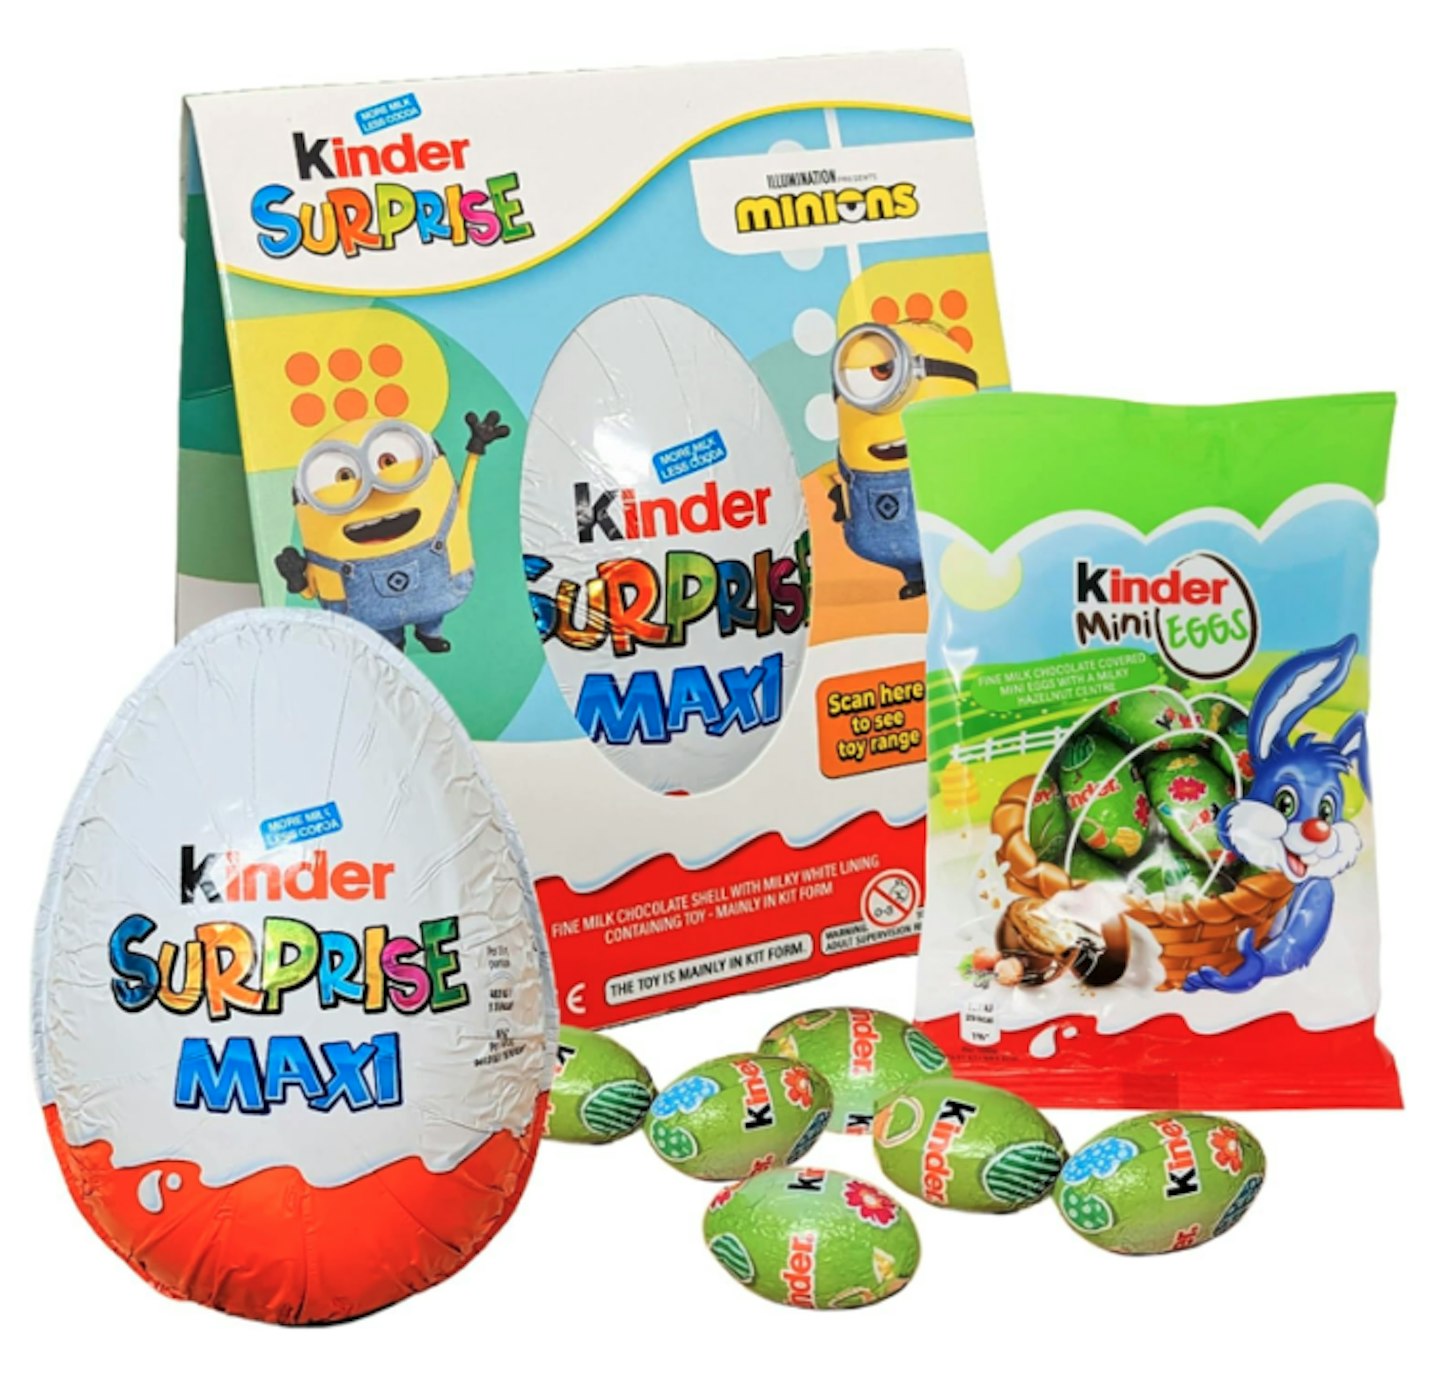 Kinder Maxi Easter Egg Minions Easter Egg with Toy